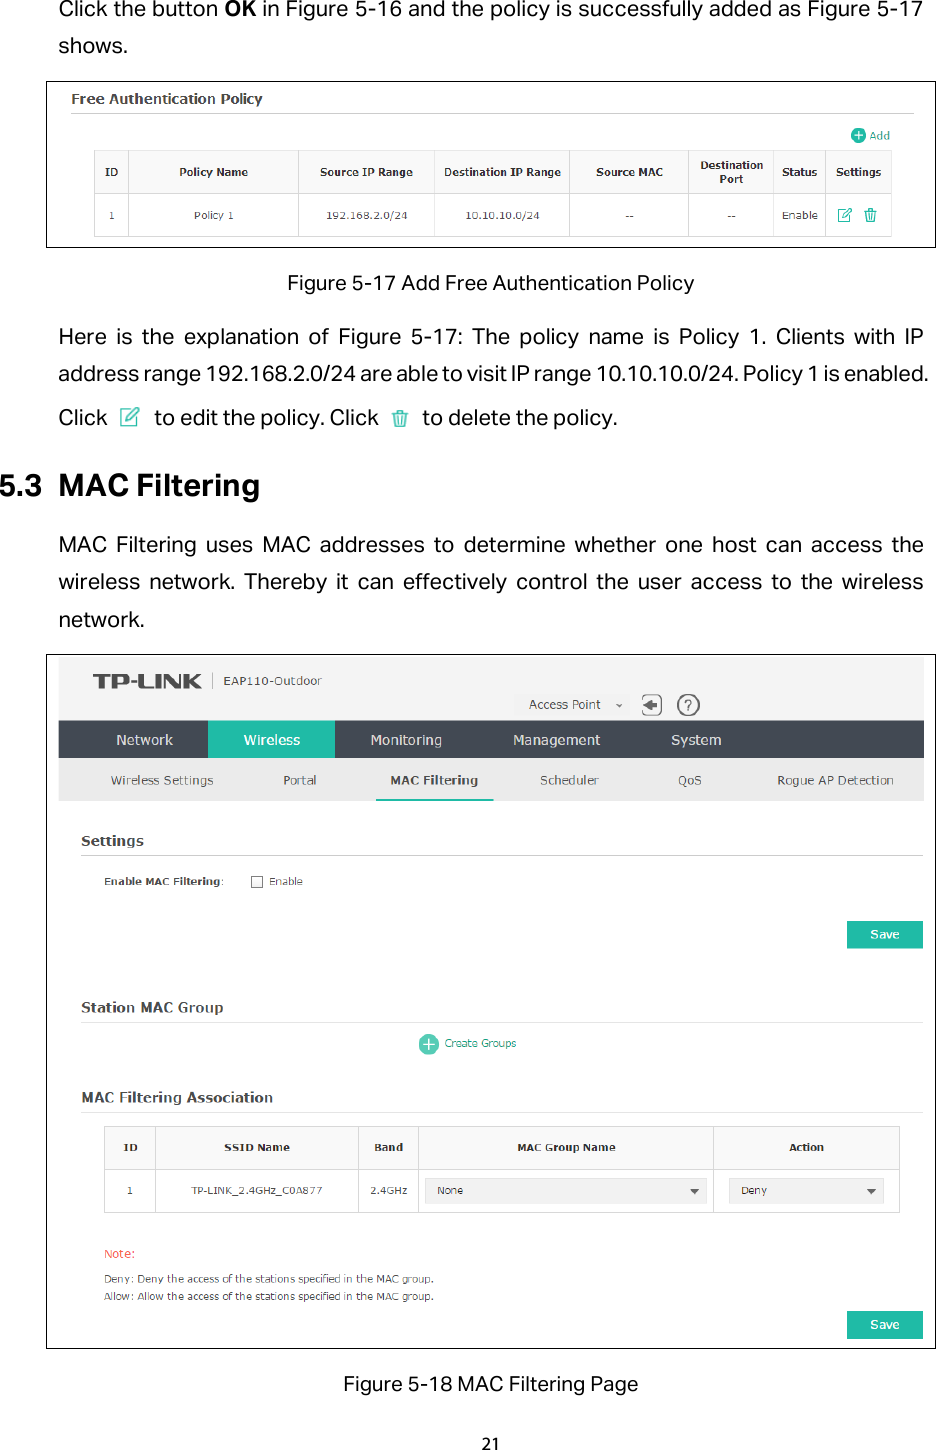 Click the button OK in Figure 5-16 and the policy is successfully added as Figure 5-17 shows.  Figure 5-17 Add Free Authentication Policy Here is the explanation of Figure  5-17: The policy name is Policy 1. Clients with IP address range 192.168.2.0/24 are able to visit IP range 10.10.10.0/24. Policy 1 is enabled. Click   to edit the policy. Click   to delete the policy. 5.3 MAC Filtering MAC Filtering uses MAC addresses to determine whether one host can access the wireless network. Thereby it can effectively control the user access to the wireless network.    Figure 5-18 MAC Filtering Page 21  